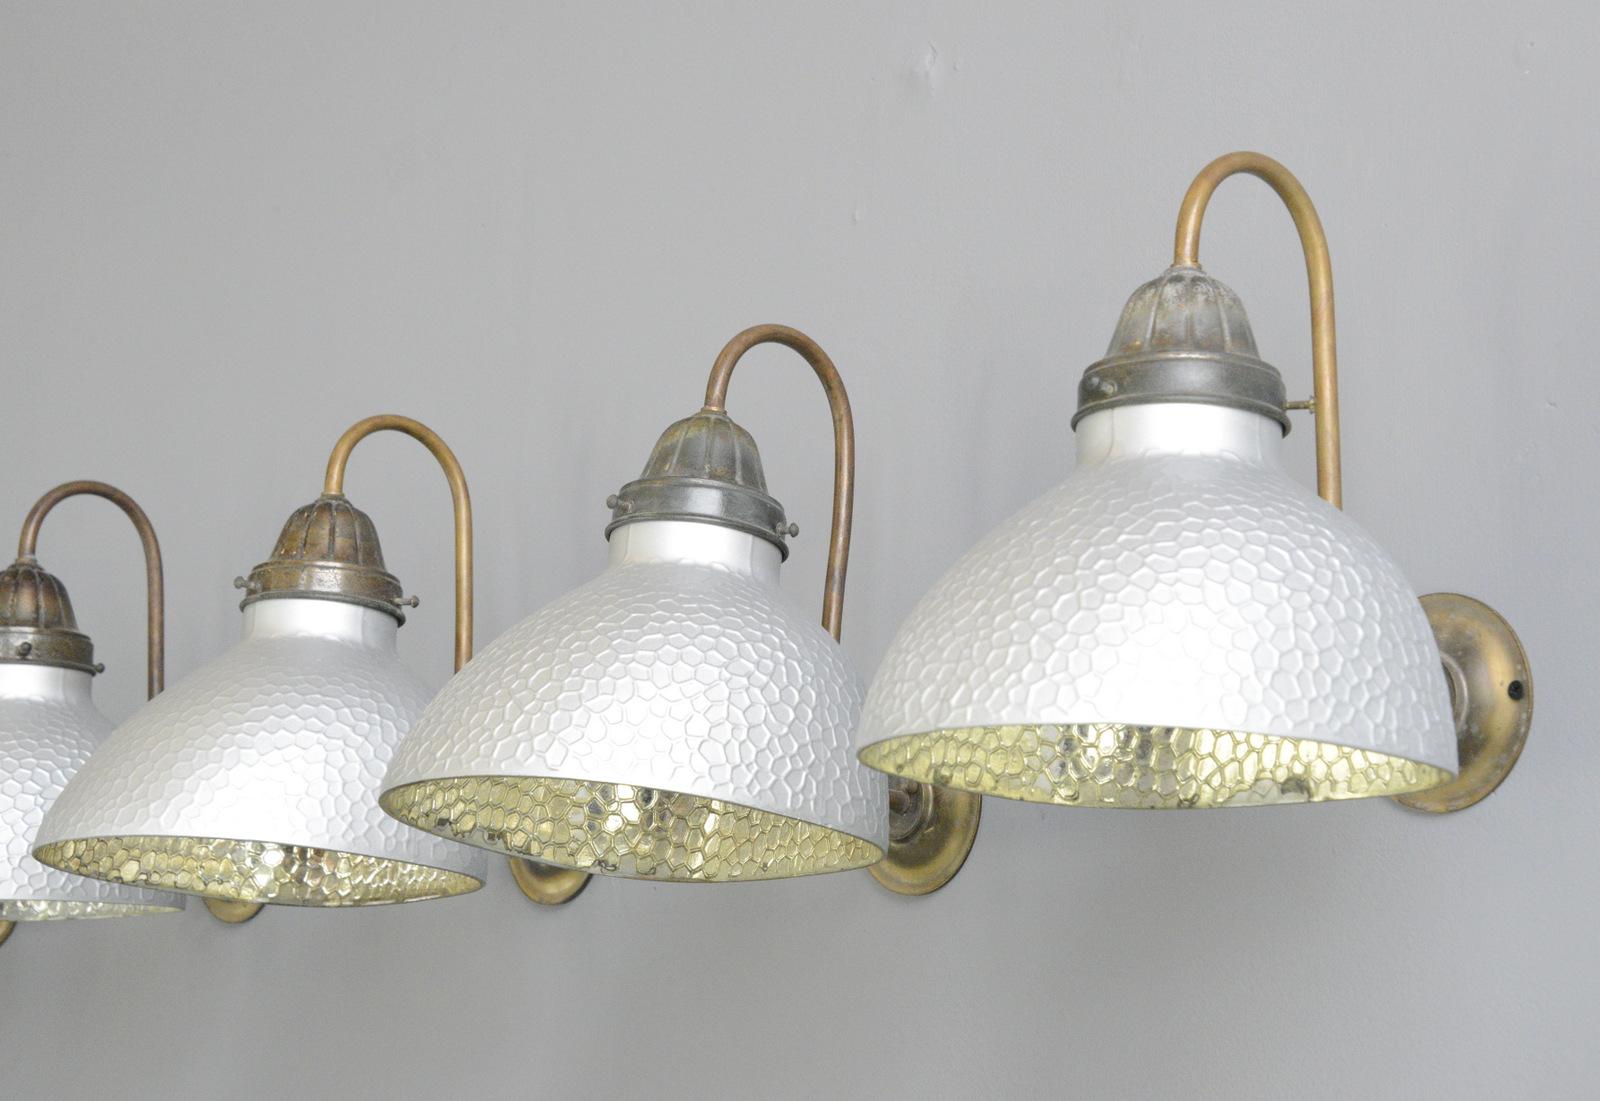 Wall mounted mercury glass lights by Philips, circa 1930s

- Price is per light (5 available)
- Copper arms
- Mercury glass
- Takes E27 fitting bulbs
- Made by Phillips, Eindhoven
- Dutch, 1930s
- Measures: 22cm wide x 32cm tall x 29cm